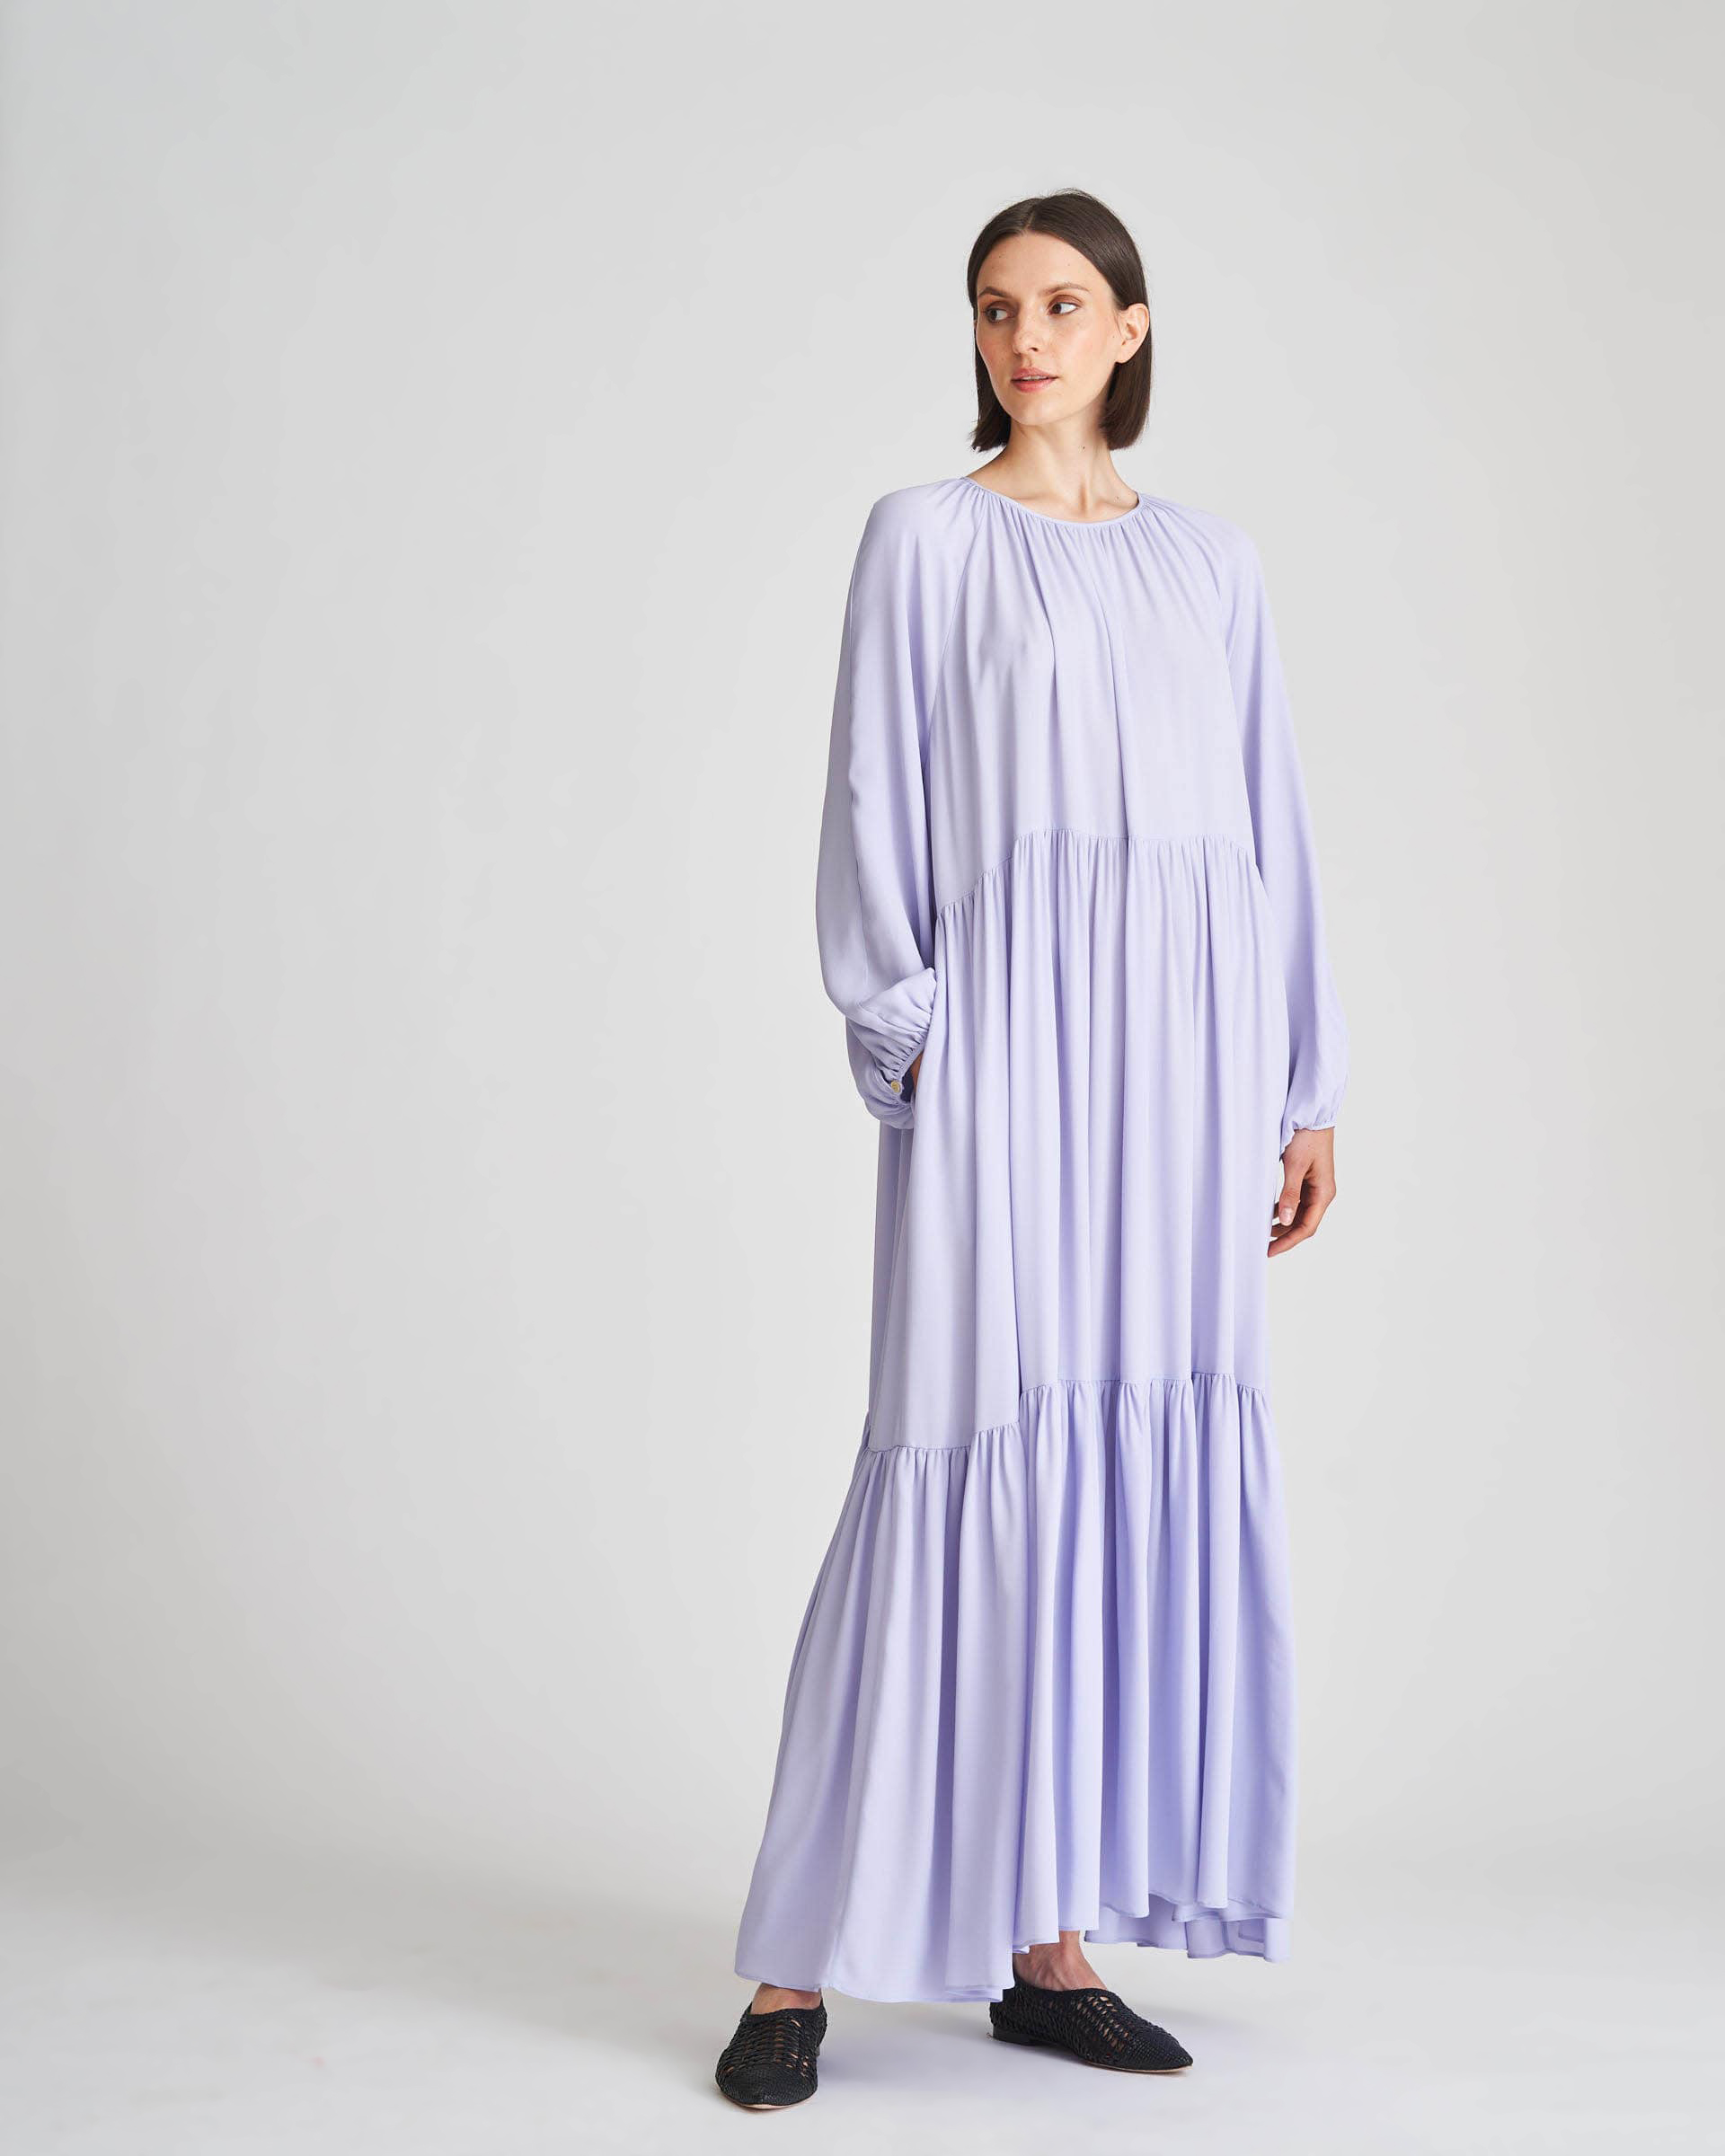 The Market Store | Long Round Neck Dress With Flounces